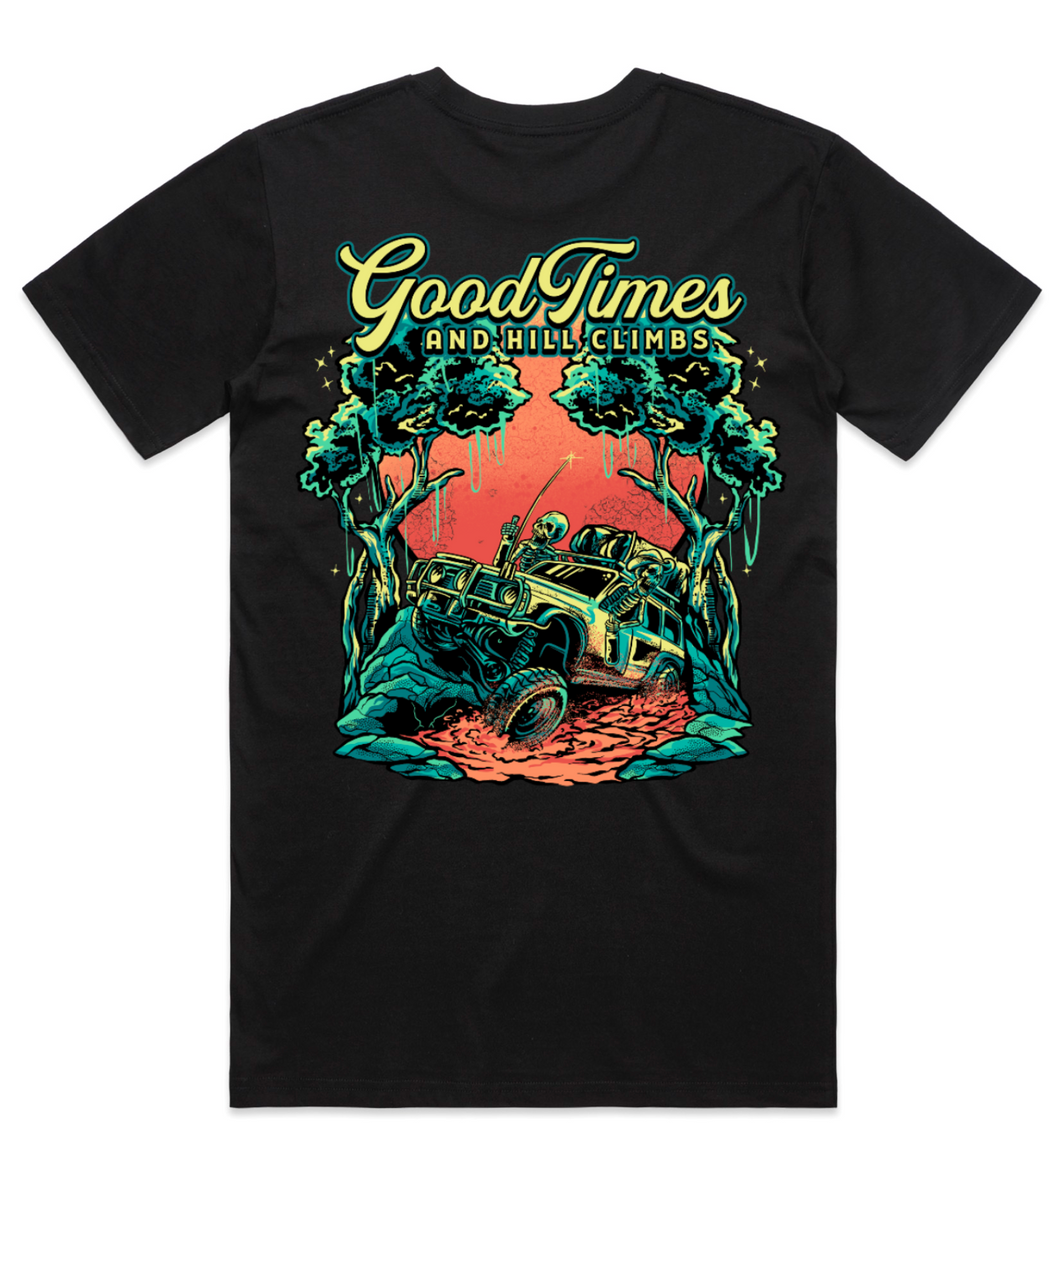 Good Times And Hill Climbs - Men's Tee